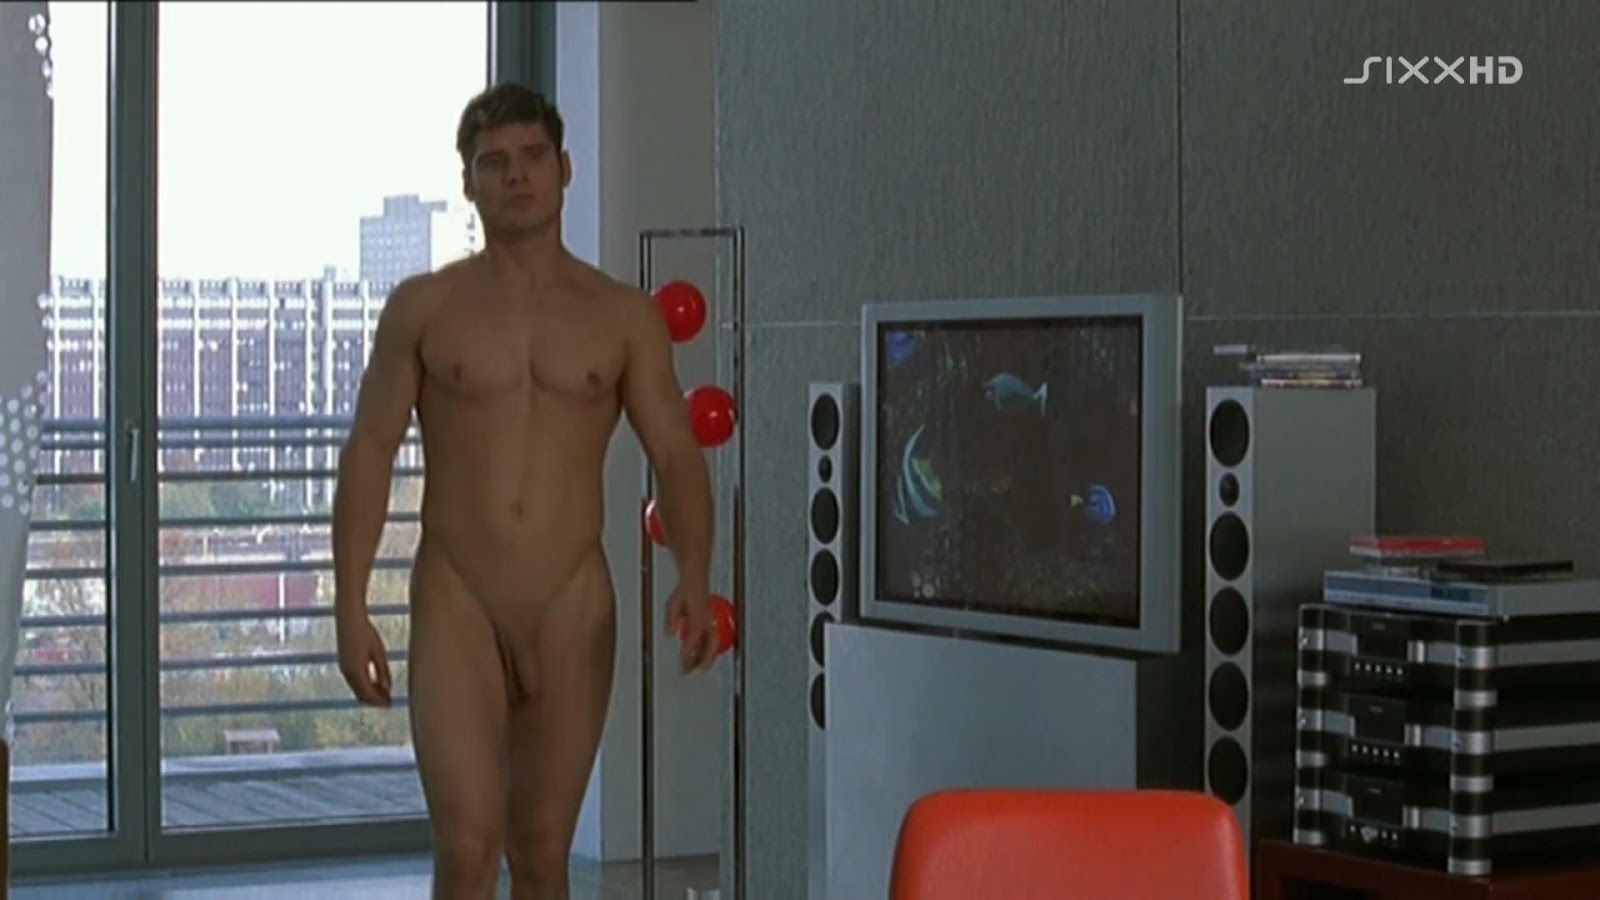 23 Movies & Tv Shows That Include Full-frontal Male Nudity